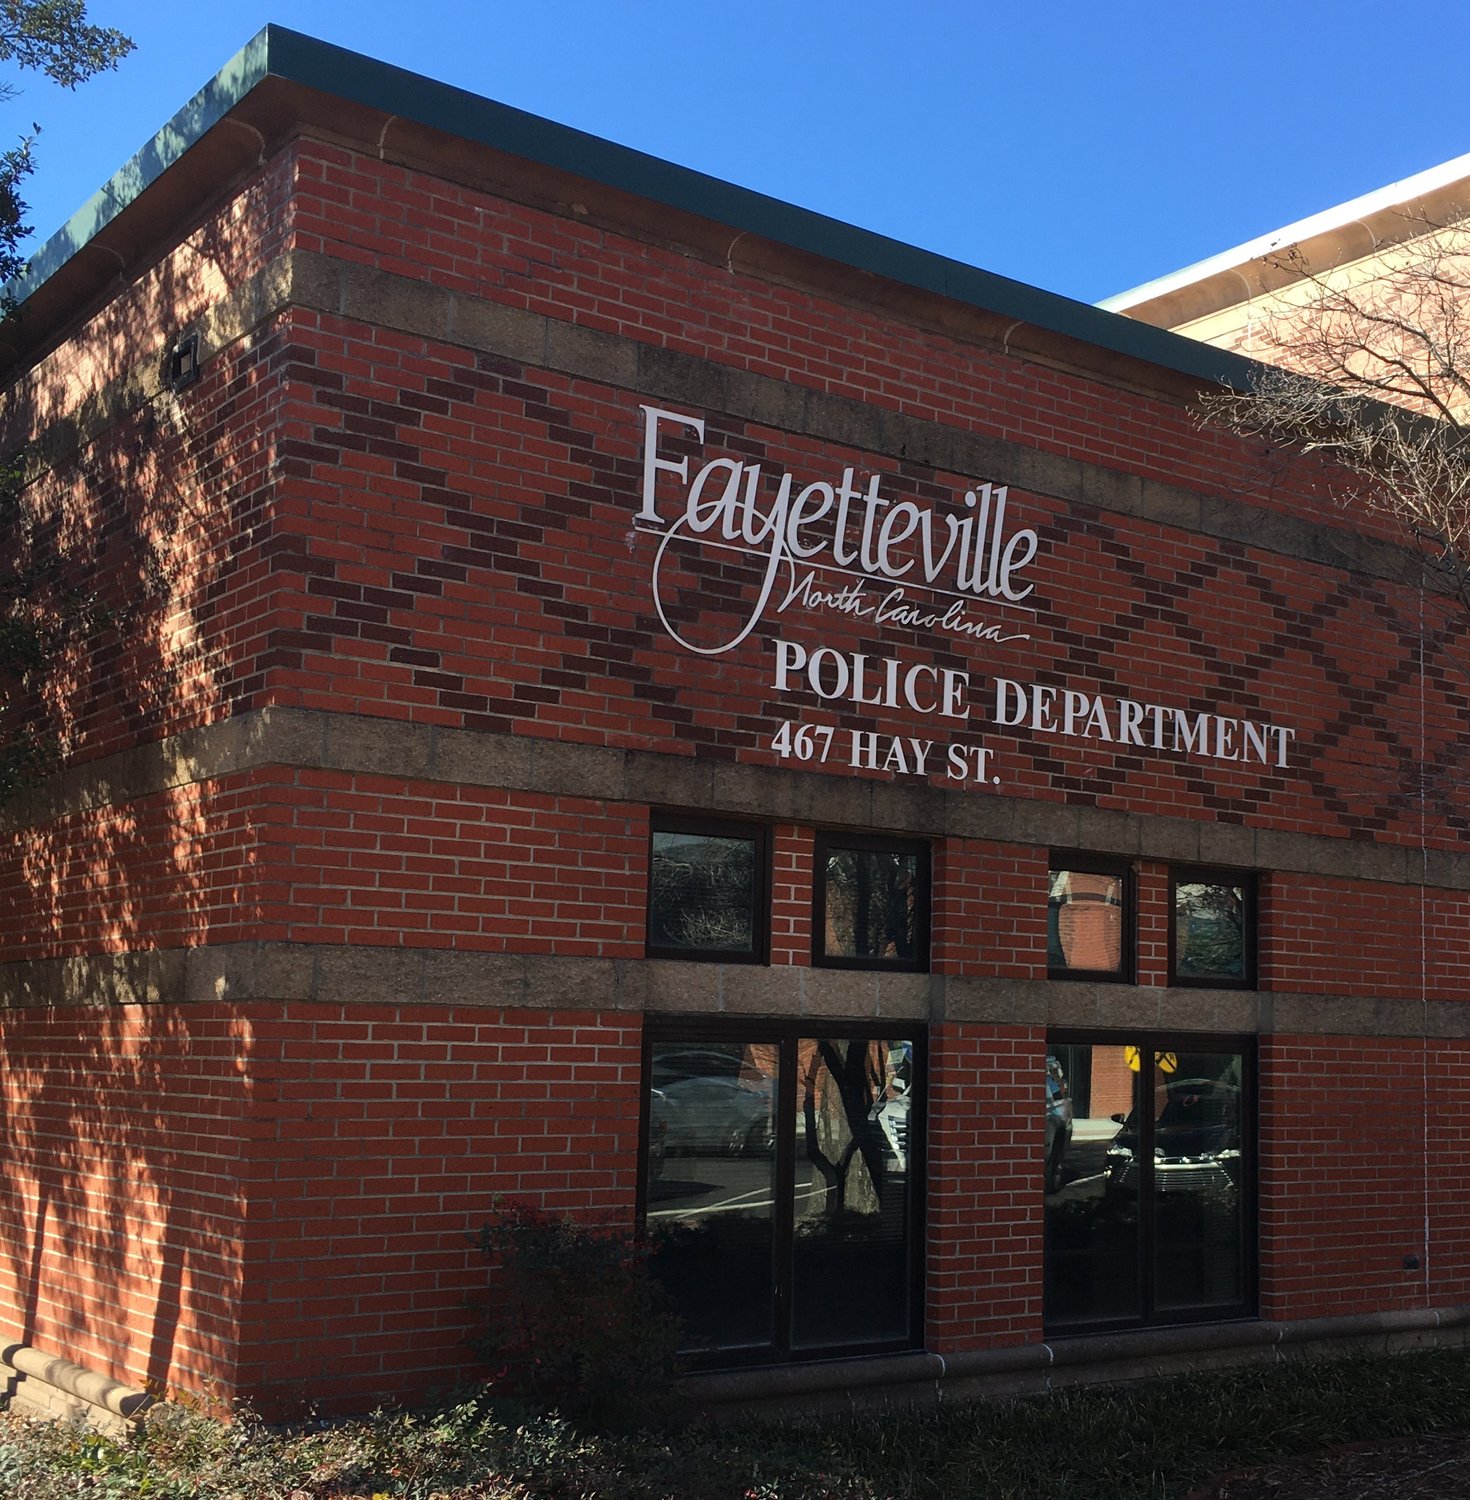 The Fayetteville Police Department and other city agencies are developing a program to give grants to community groups to support anticrime initiatives.